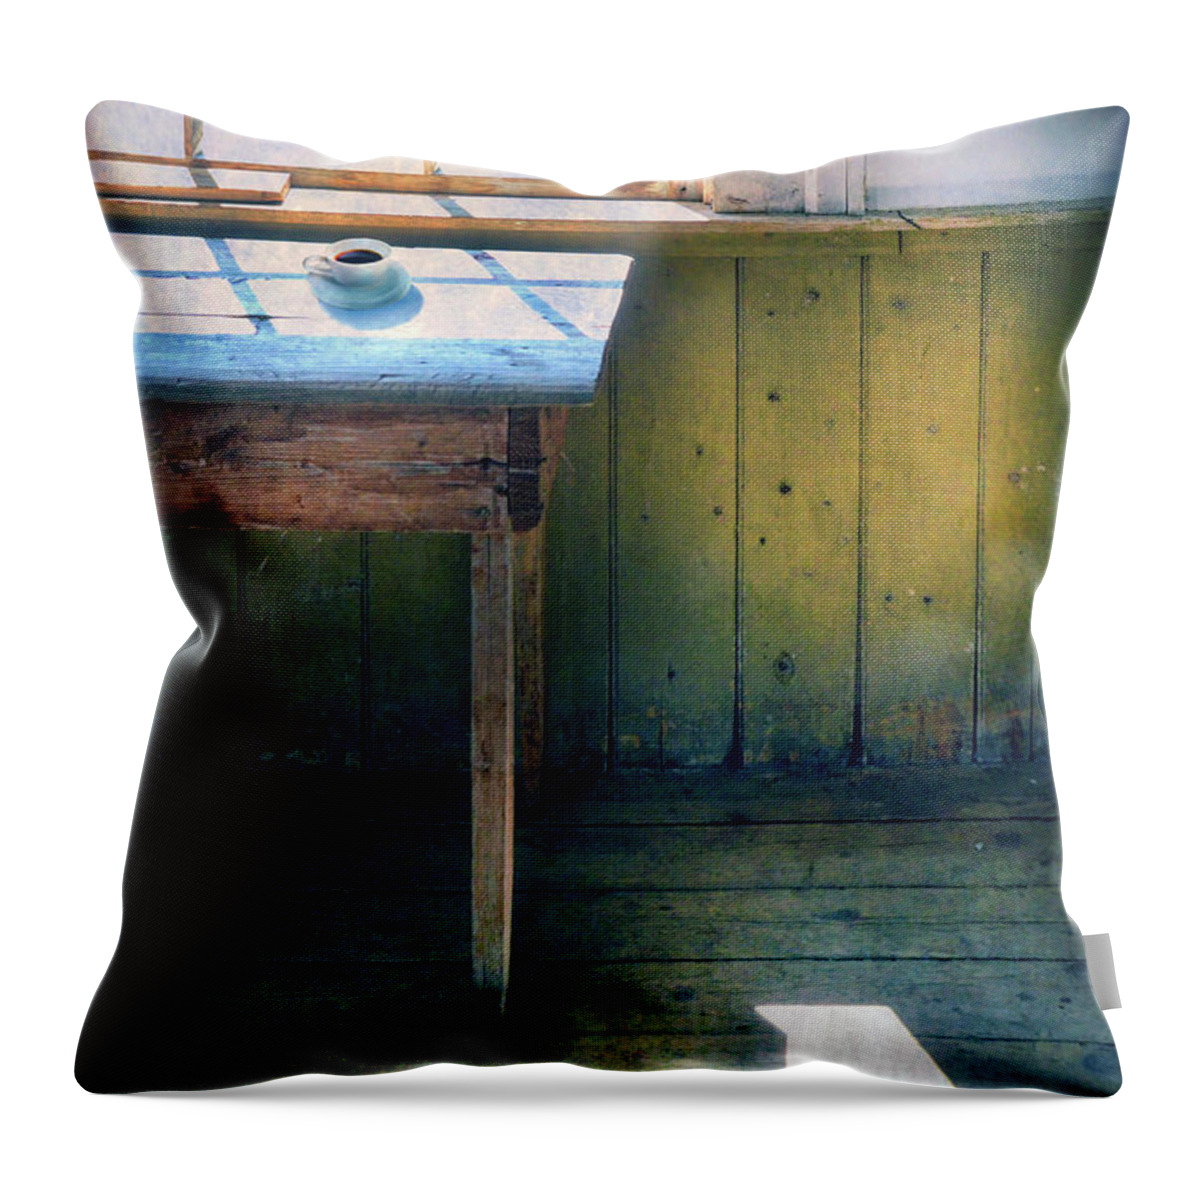 Building Throw Pillow featuring the photograph Morning Coffee by Jill Battaglia